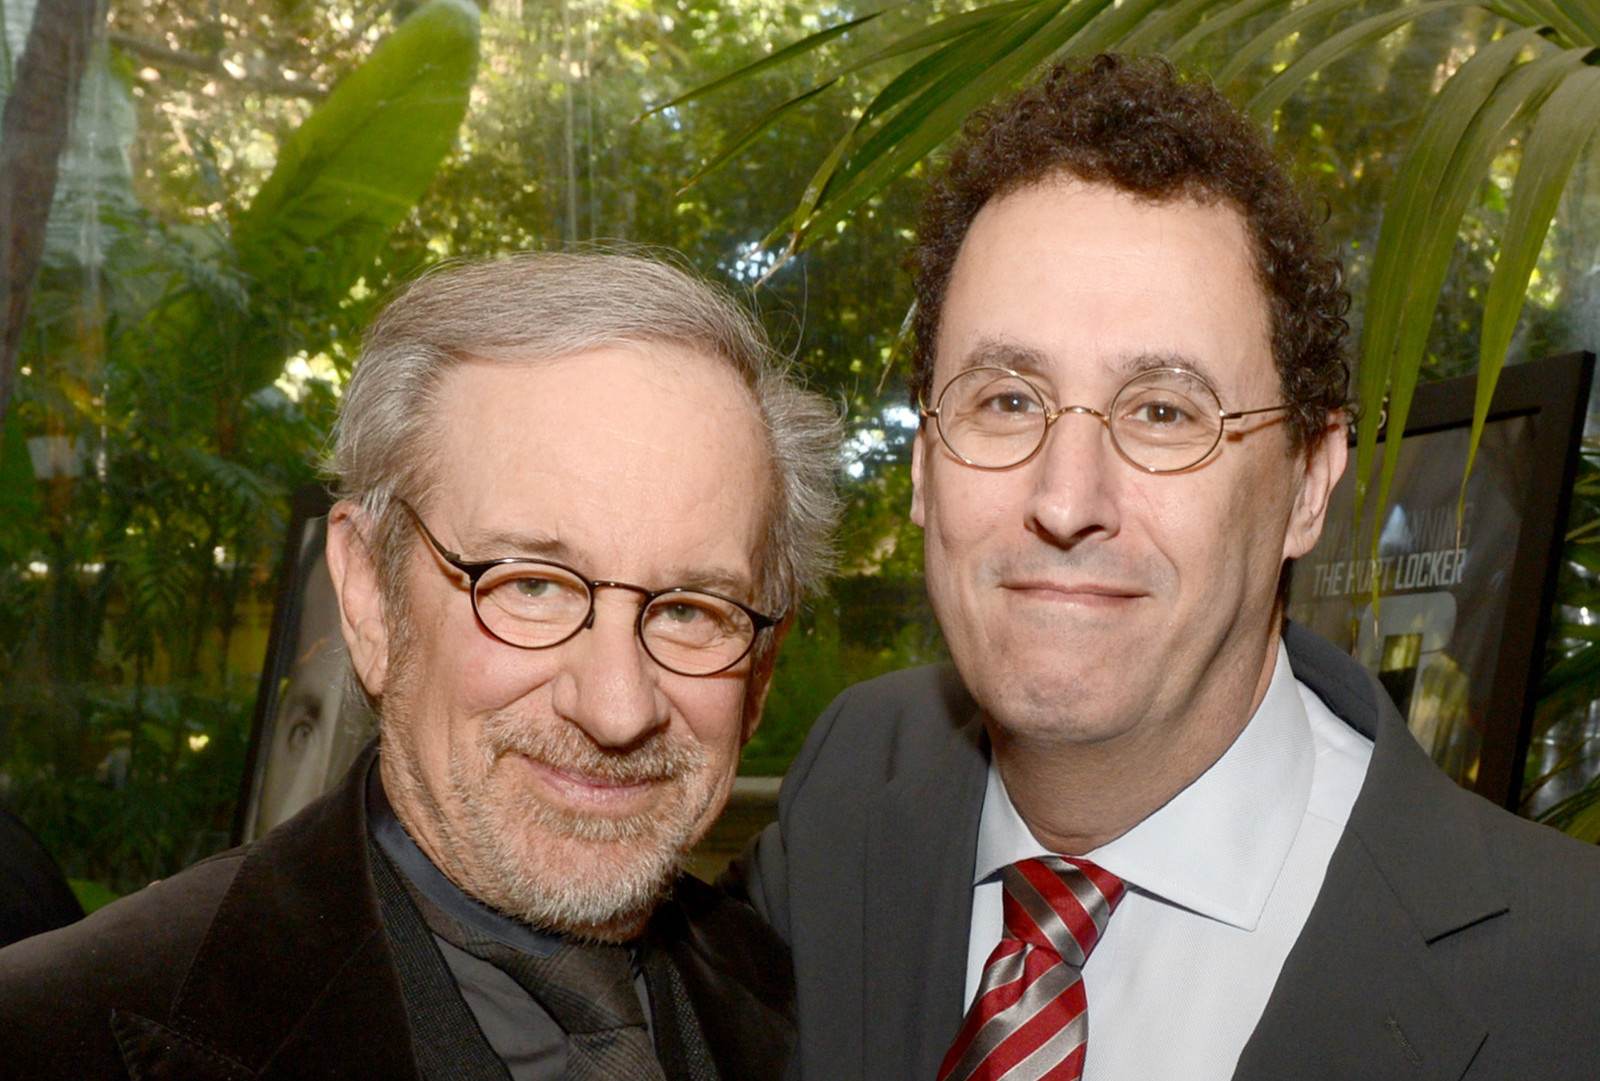 Steven Spielberg will be directing the movie, and Tony award-winning playwright Tony Kushner will be writing the script.